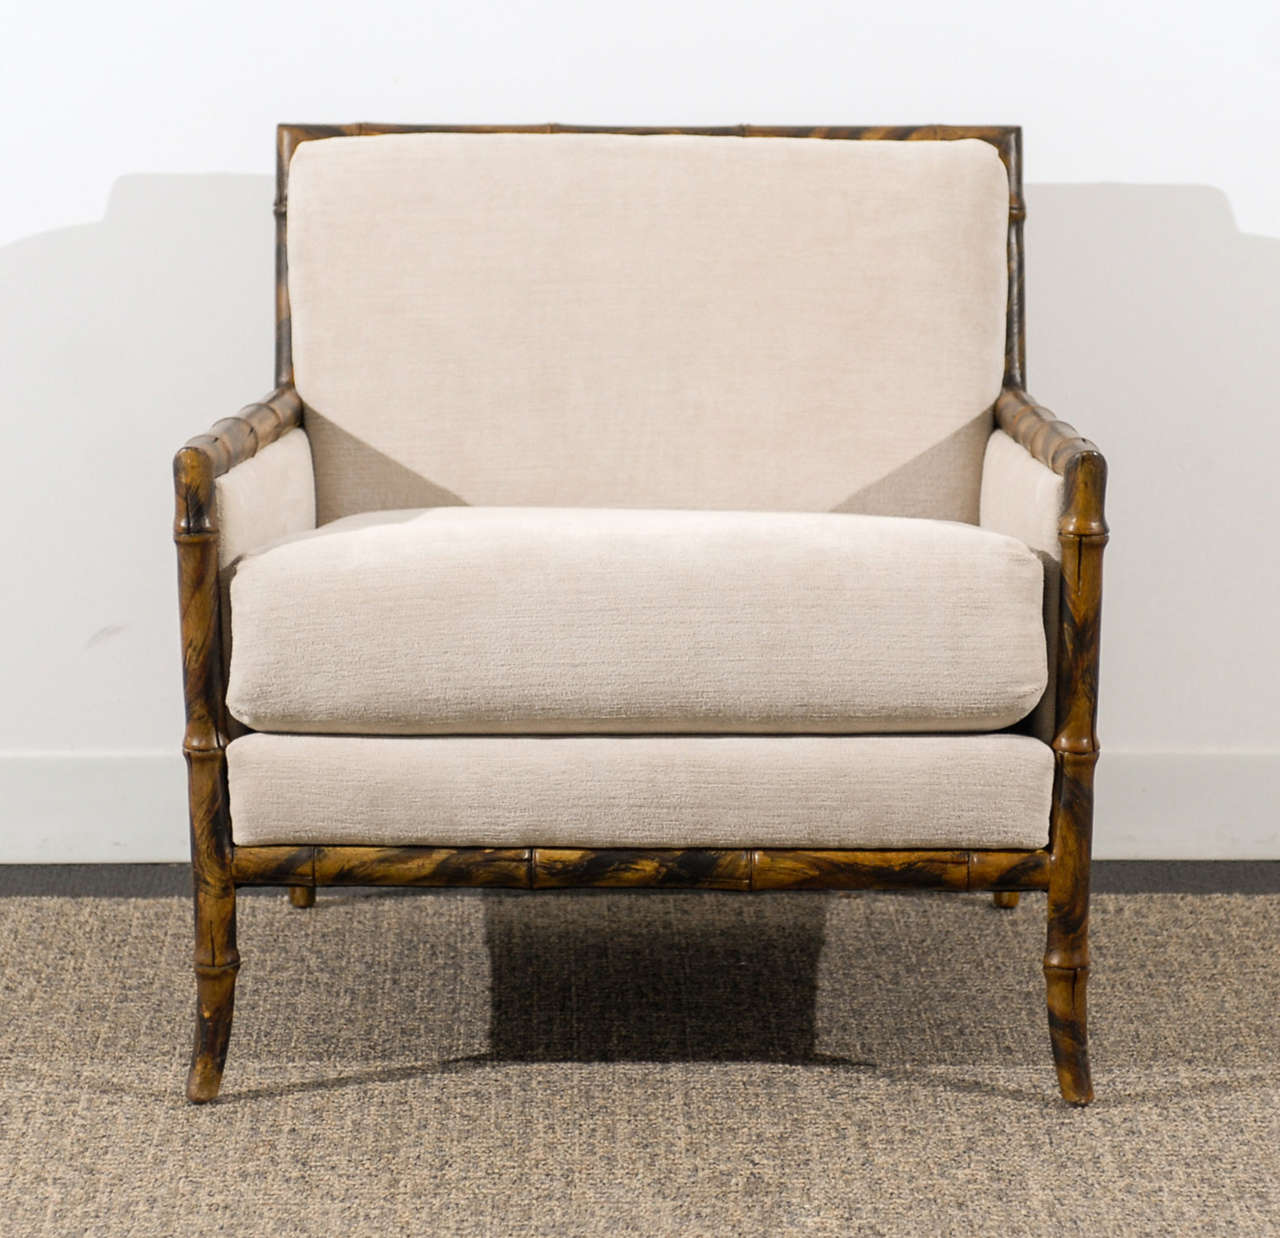 An absolutely beautiful pair of faux bamboo lounge/club chairs. Faux tortoise shell finish with cane panel inset. A slight saber detail to the leg. Upholstered in cut linen velvet. While the chairs are unmarked, they are reminiscent of